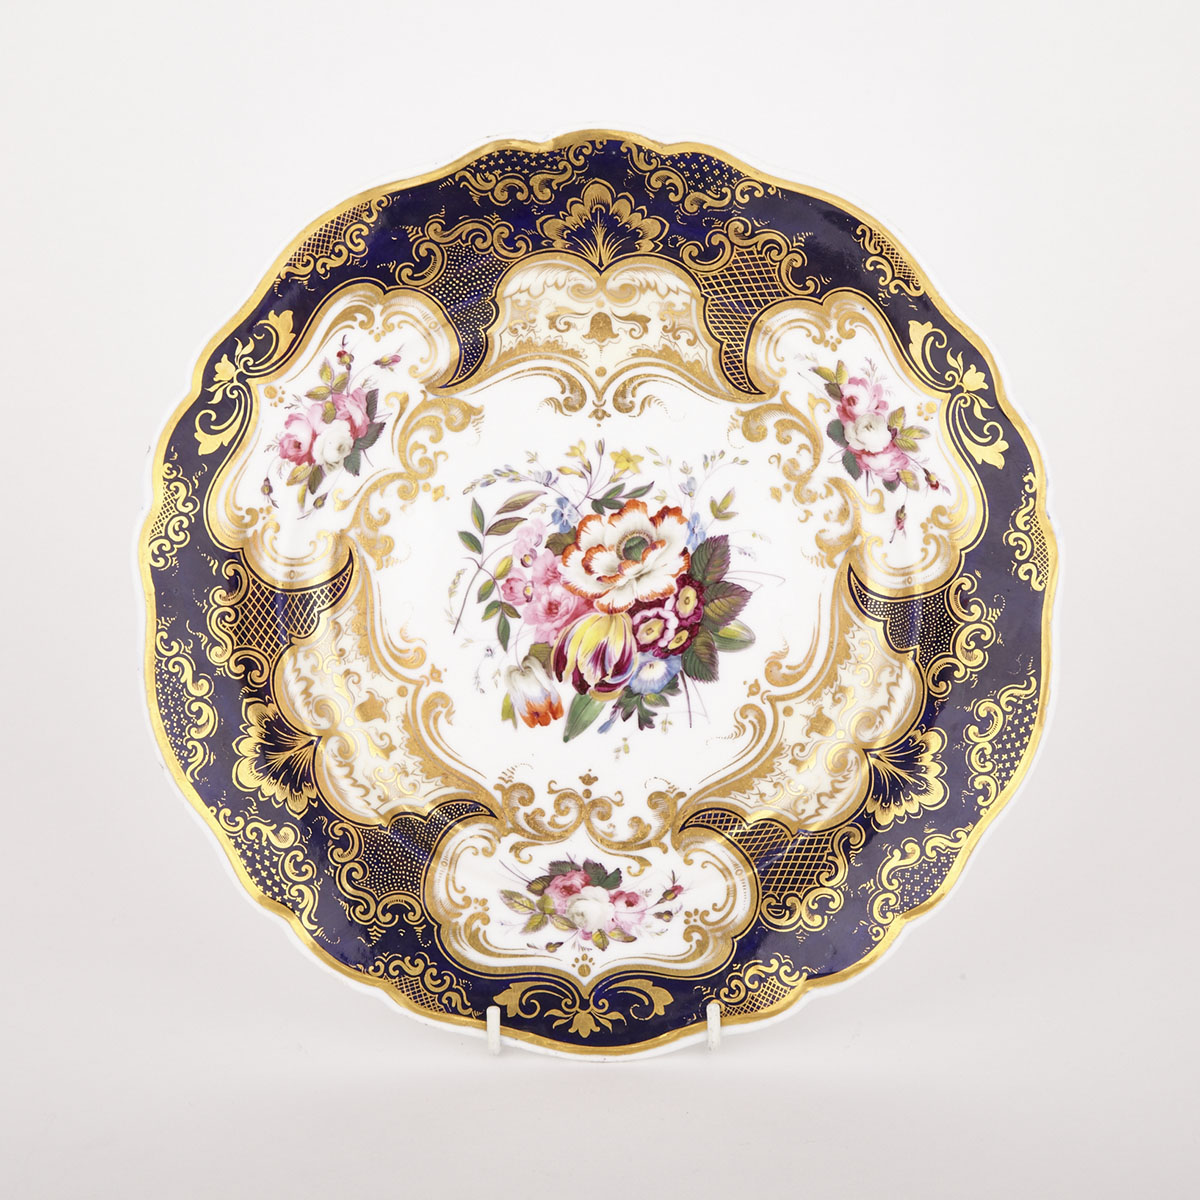 Chamberlain’s Worcester Floral Panels Plate, c.1830